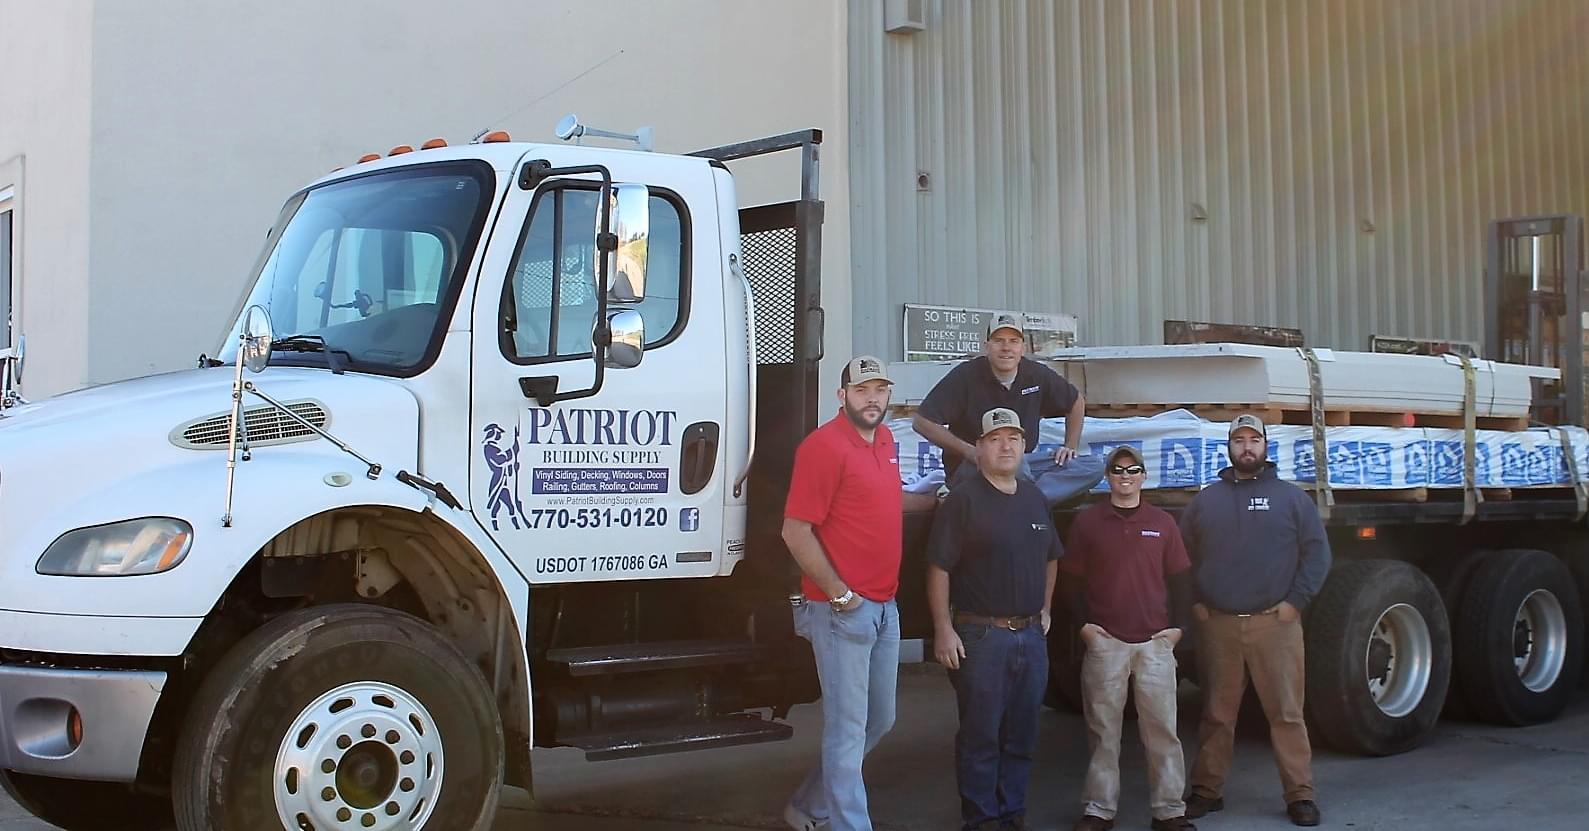 Patriot Building Supply Employees